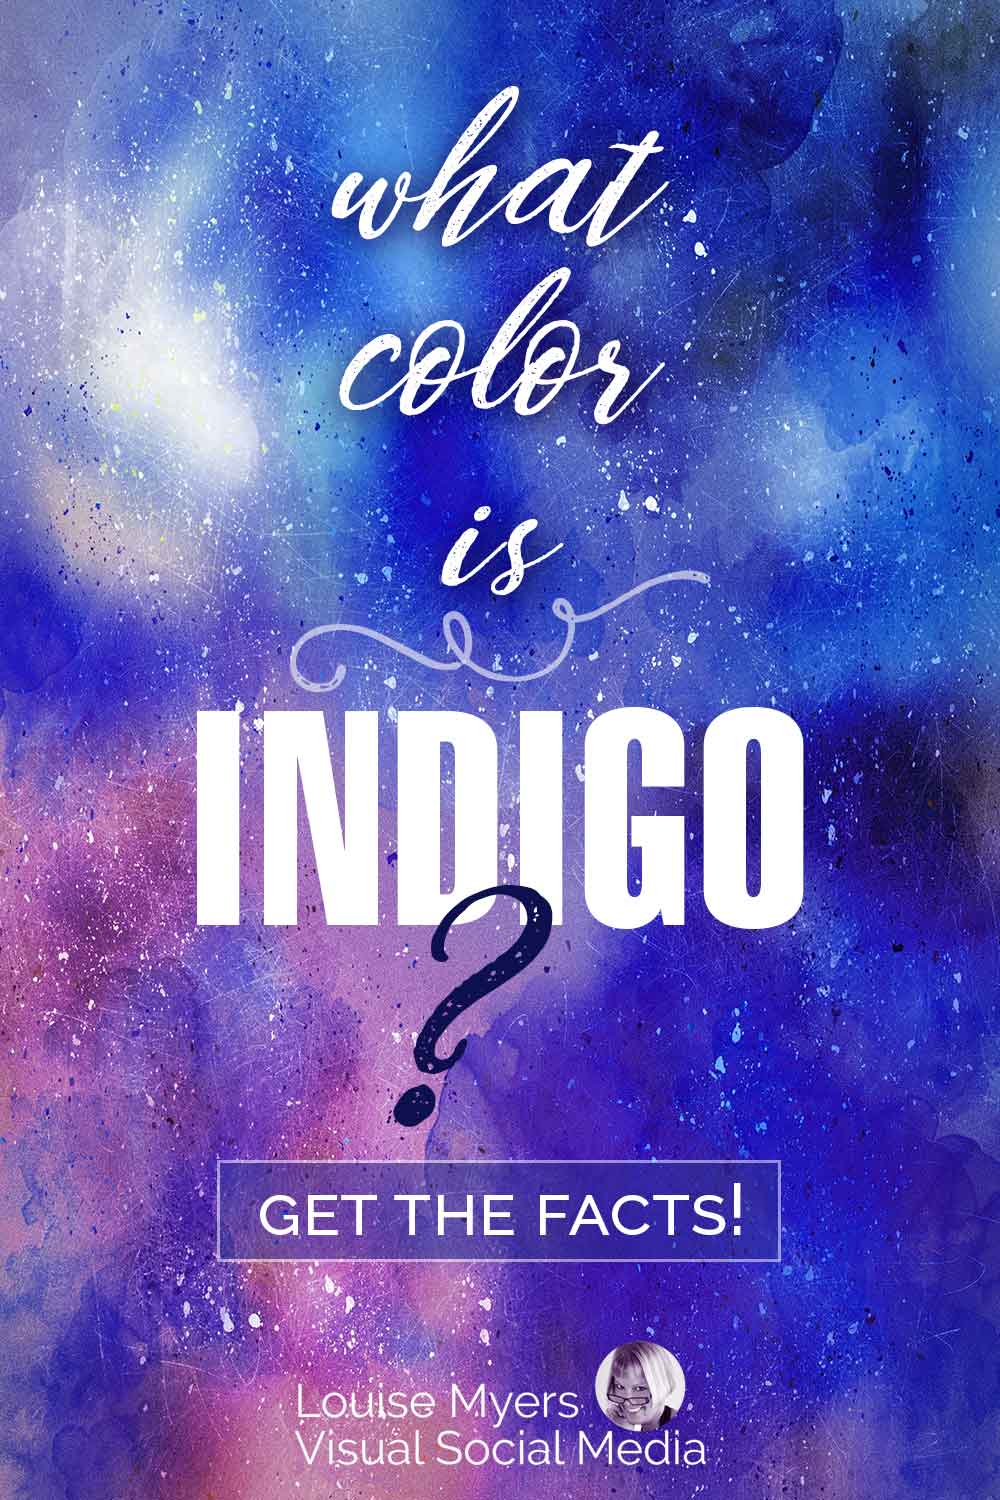 watercolor swirls of blues and purples with text saying What Color Is Indigo?